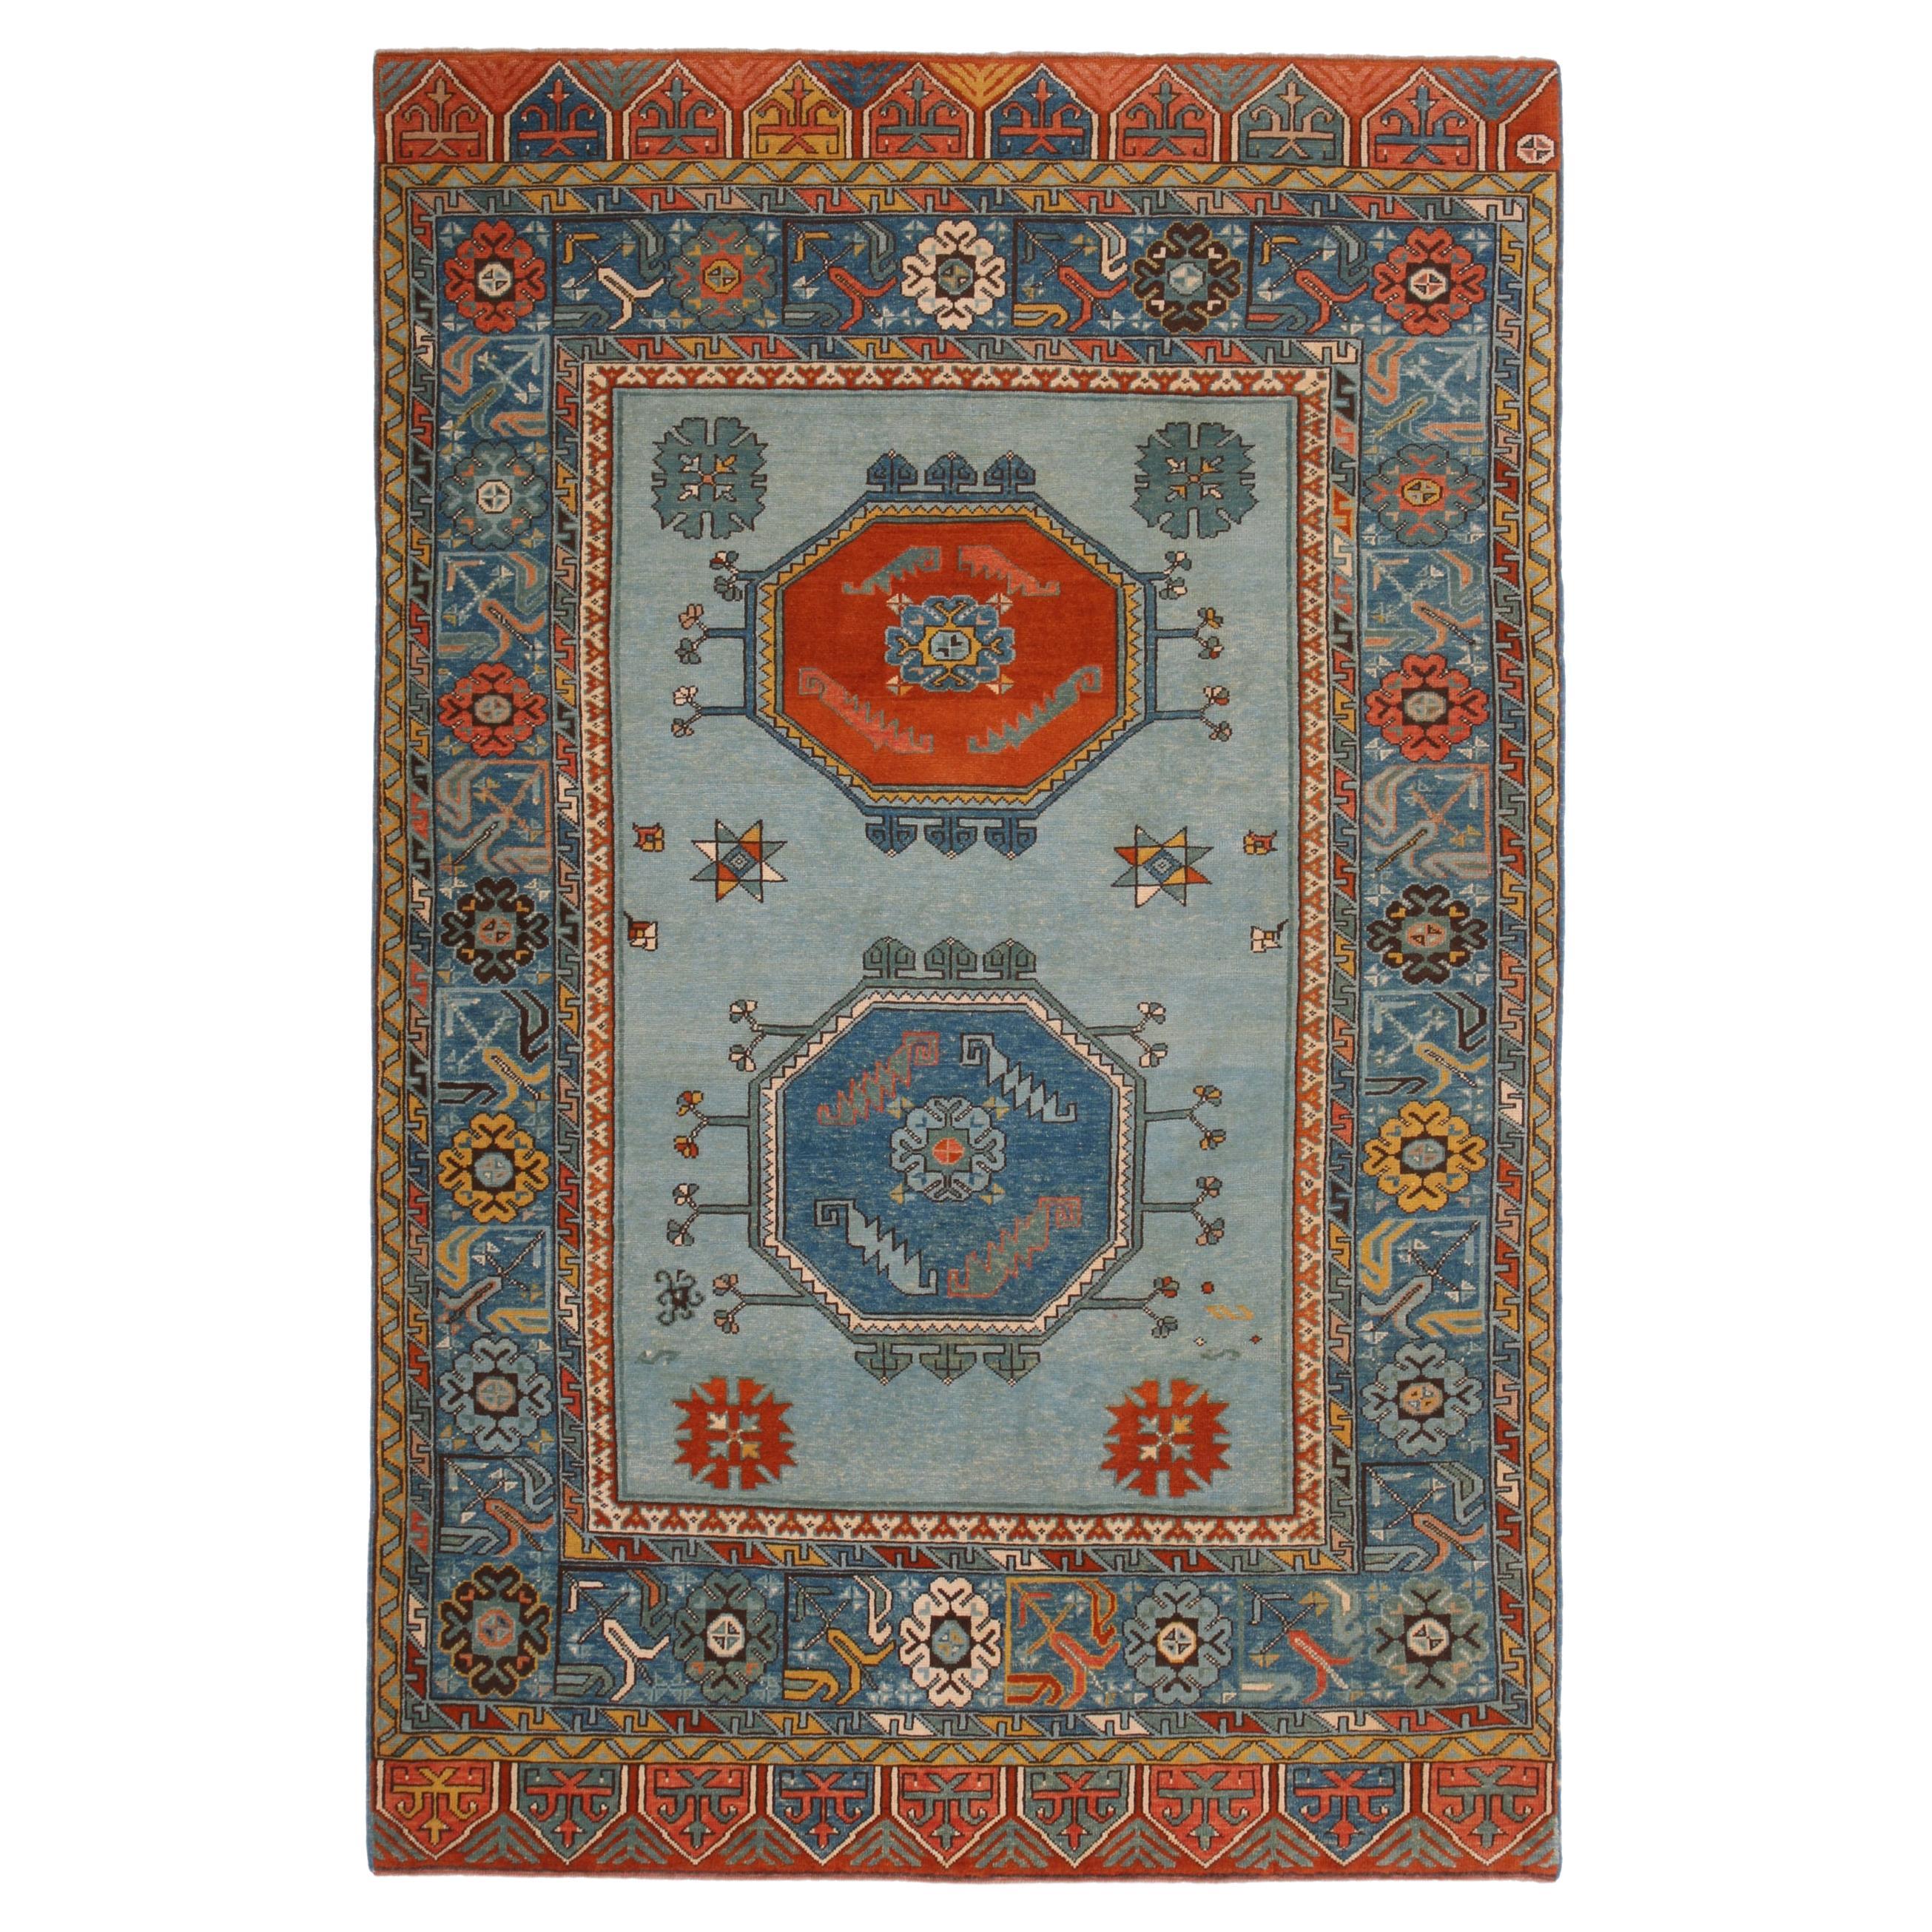 Ararat Rugs Carpet with Two Medallions 18th Century Revival Rug Natural Dyed For Sale